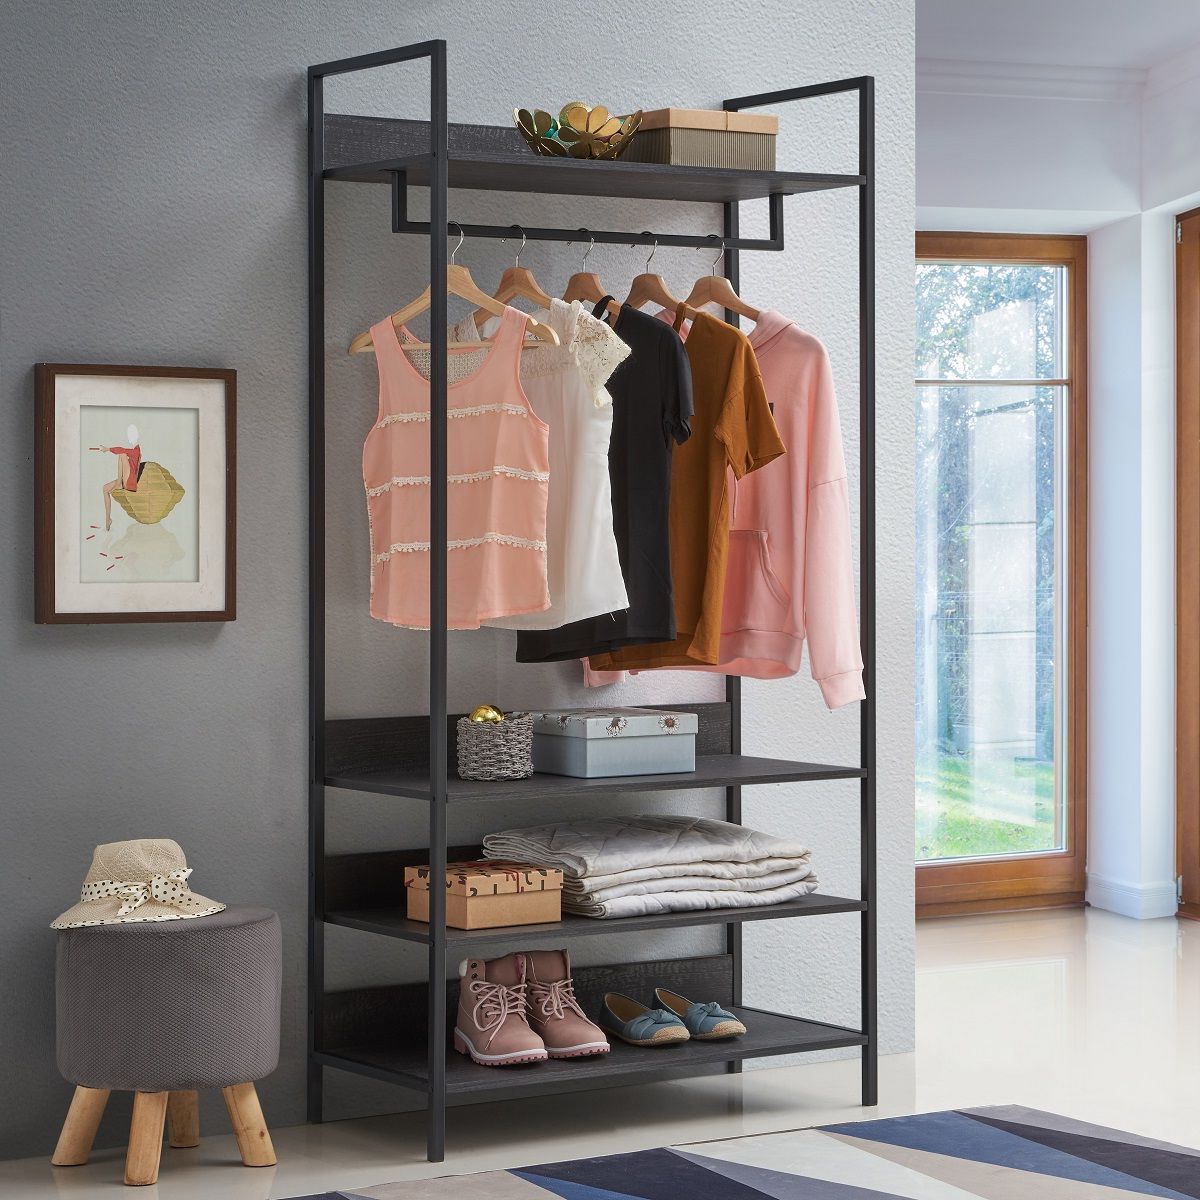 4 Shelf Closet Wardrobes Intended For Newest Open Wardrobe With 4 Shelves (View 5 of 10)